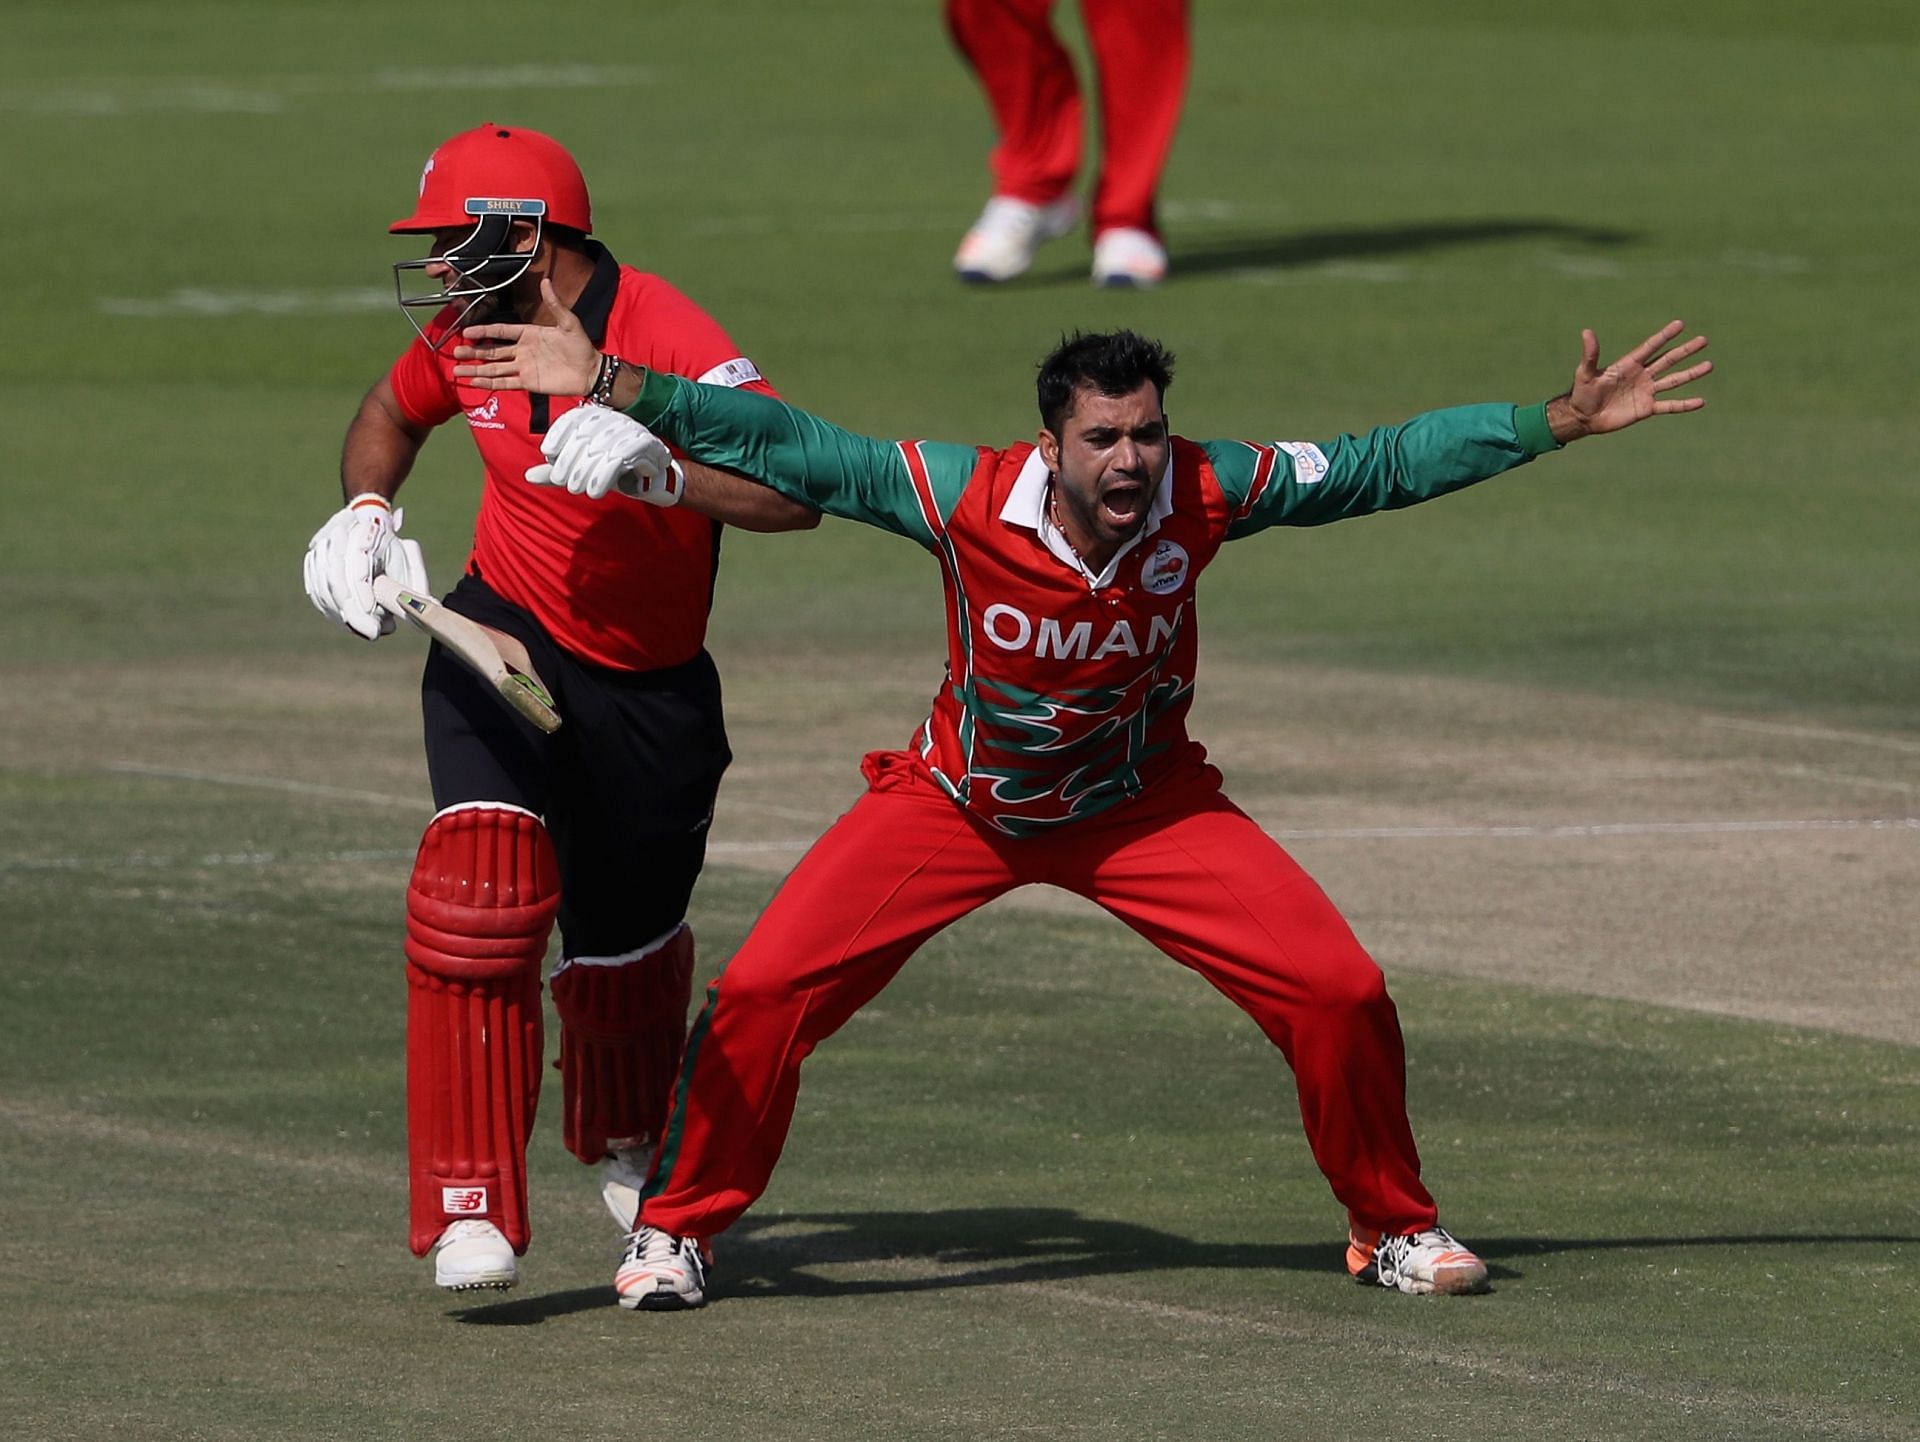 Bilal Khan has picked up 11 wickets in the competition so far